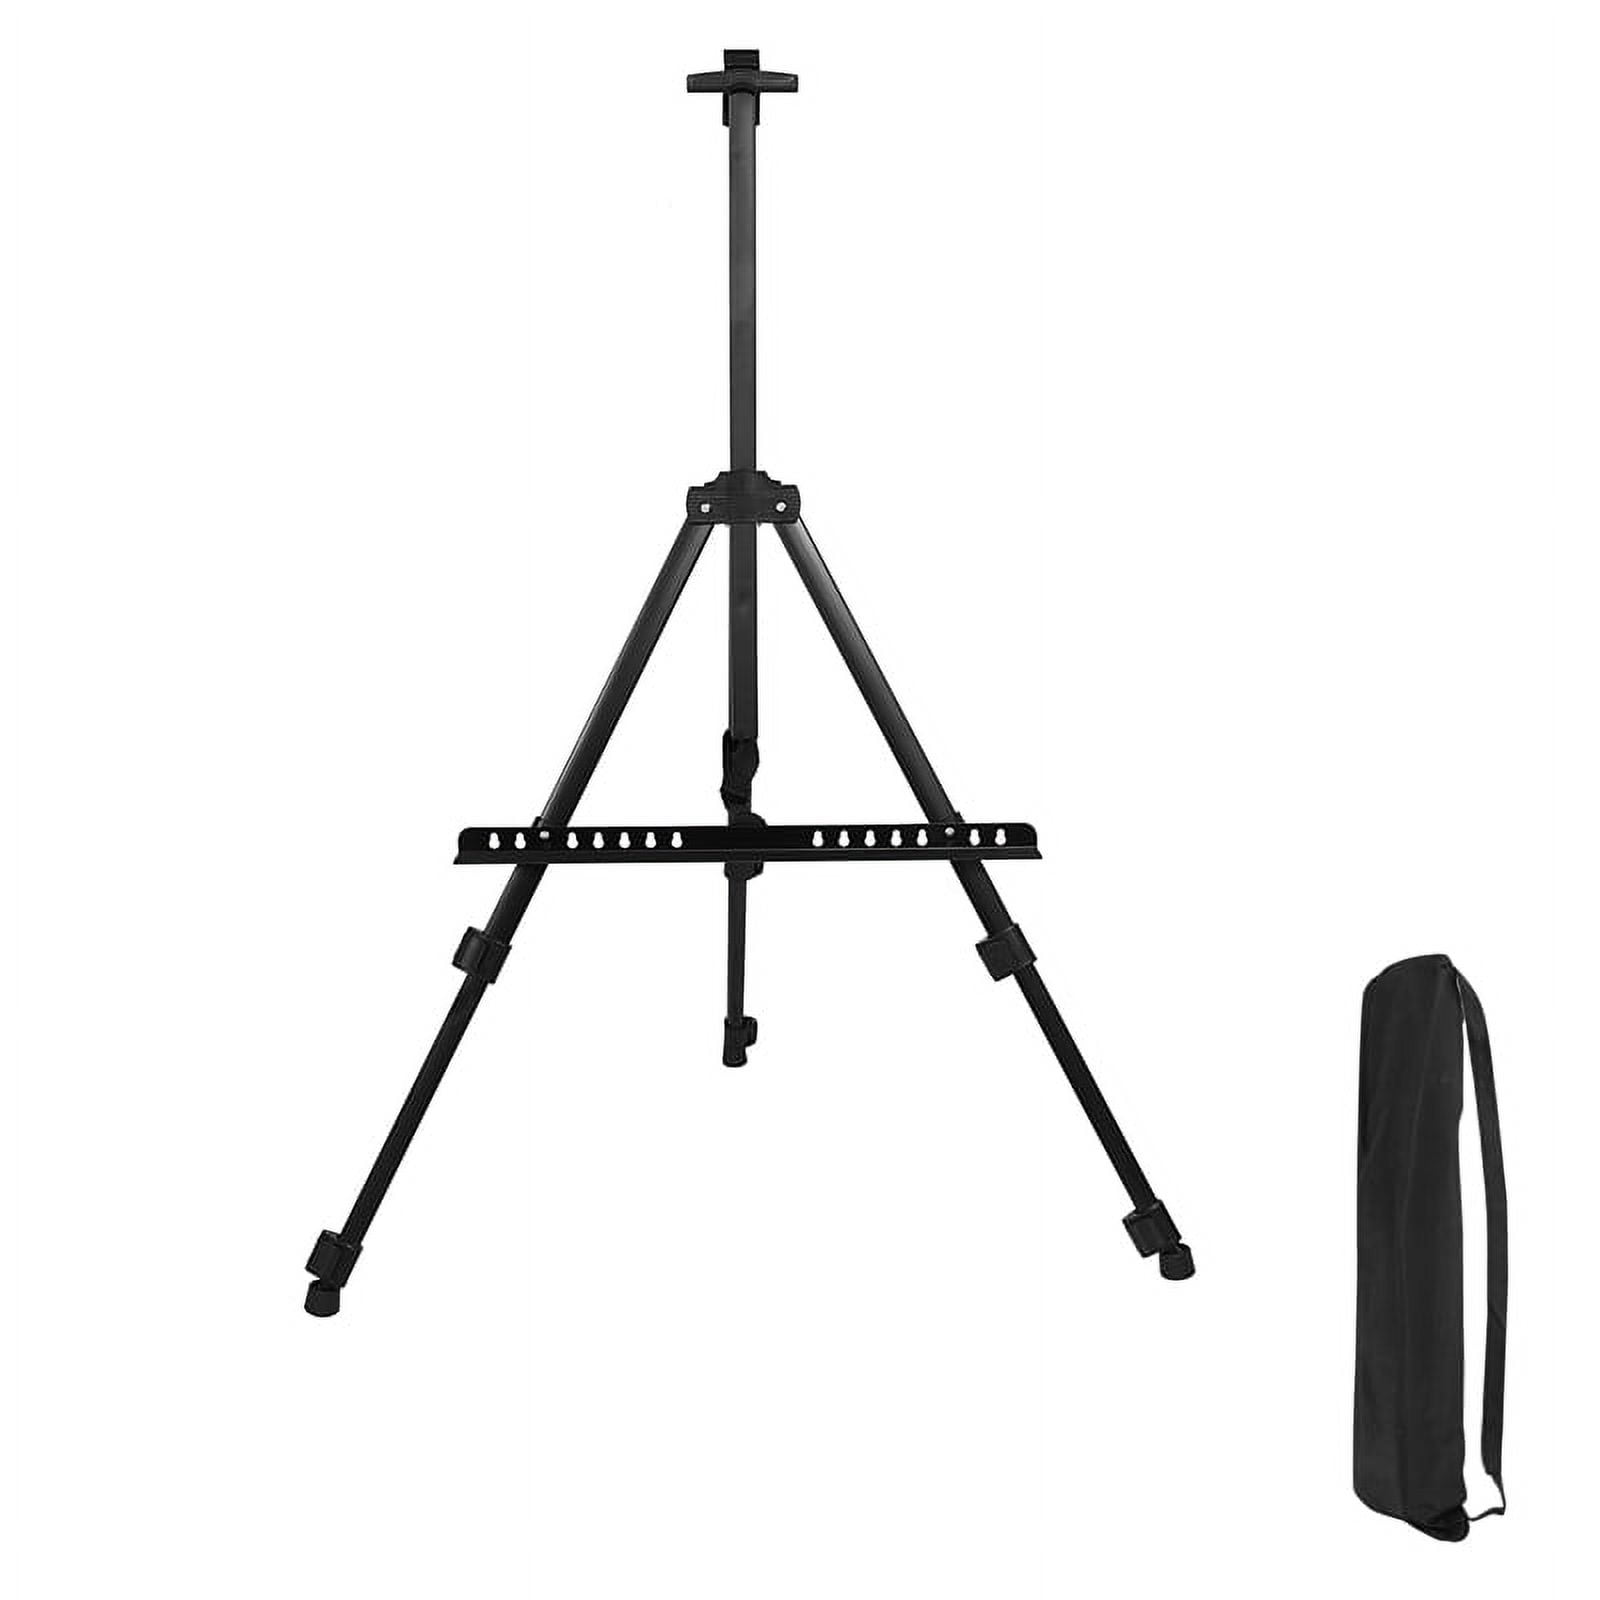 Nicpro Folding Easels for Display,6 Pack 63 Inch Metal Floor Easel Stand  Bulk Tripod Black Portable for Artist Poster Wedding with Carry Bag